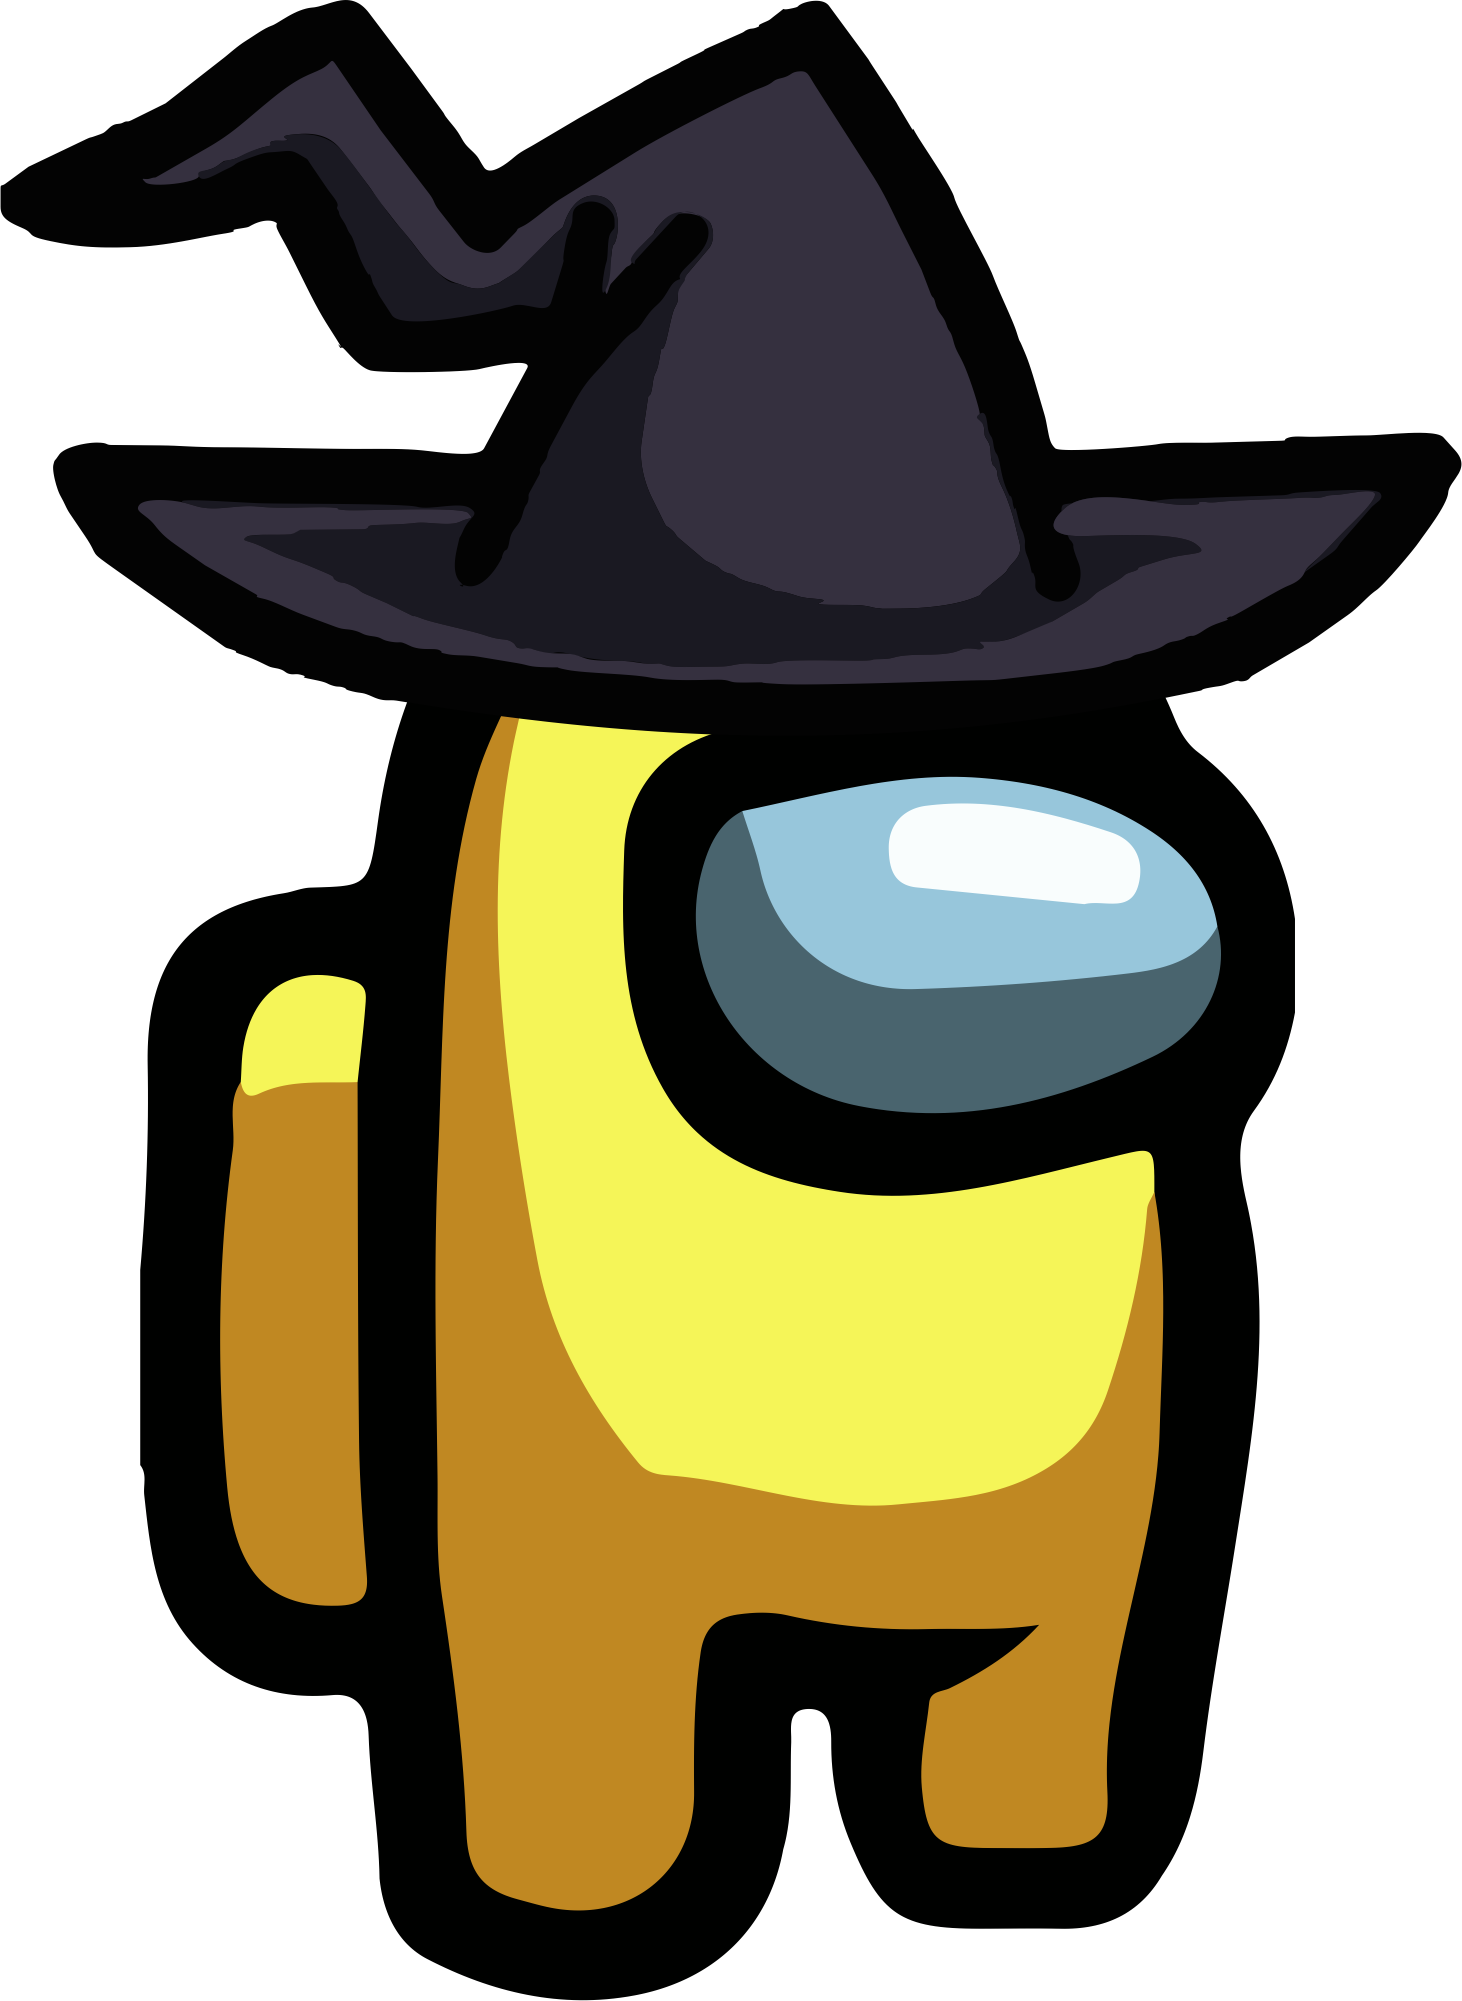 among-us-yellow-witch-hat-png-01